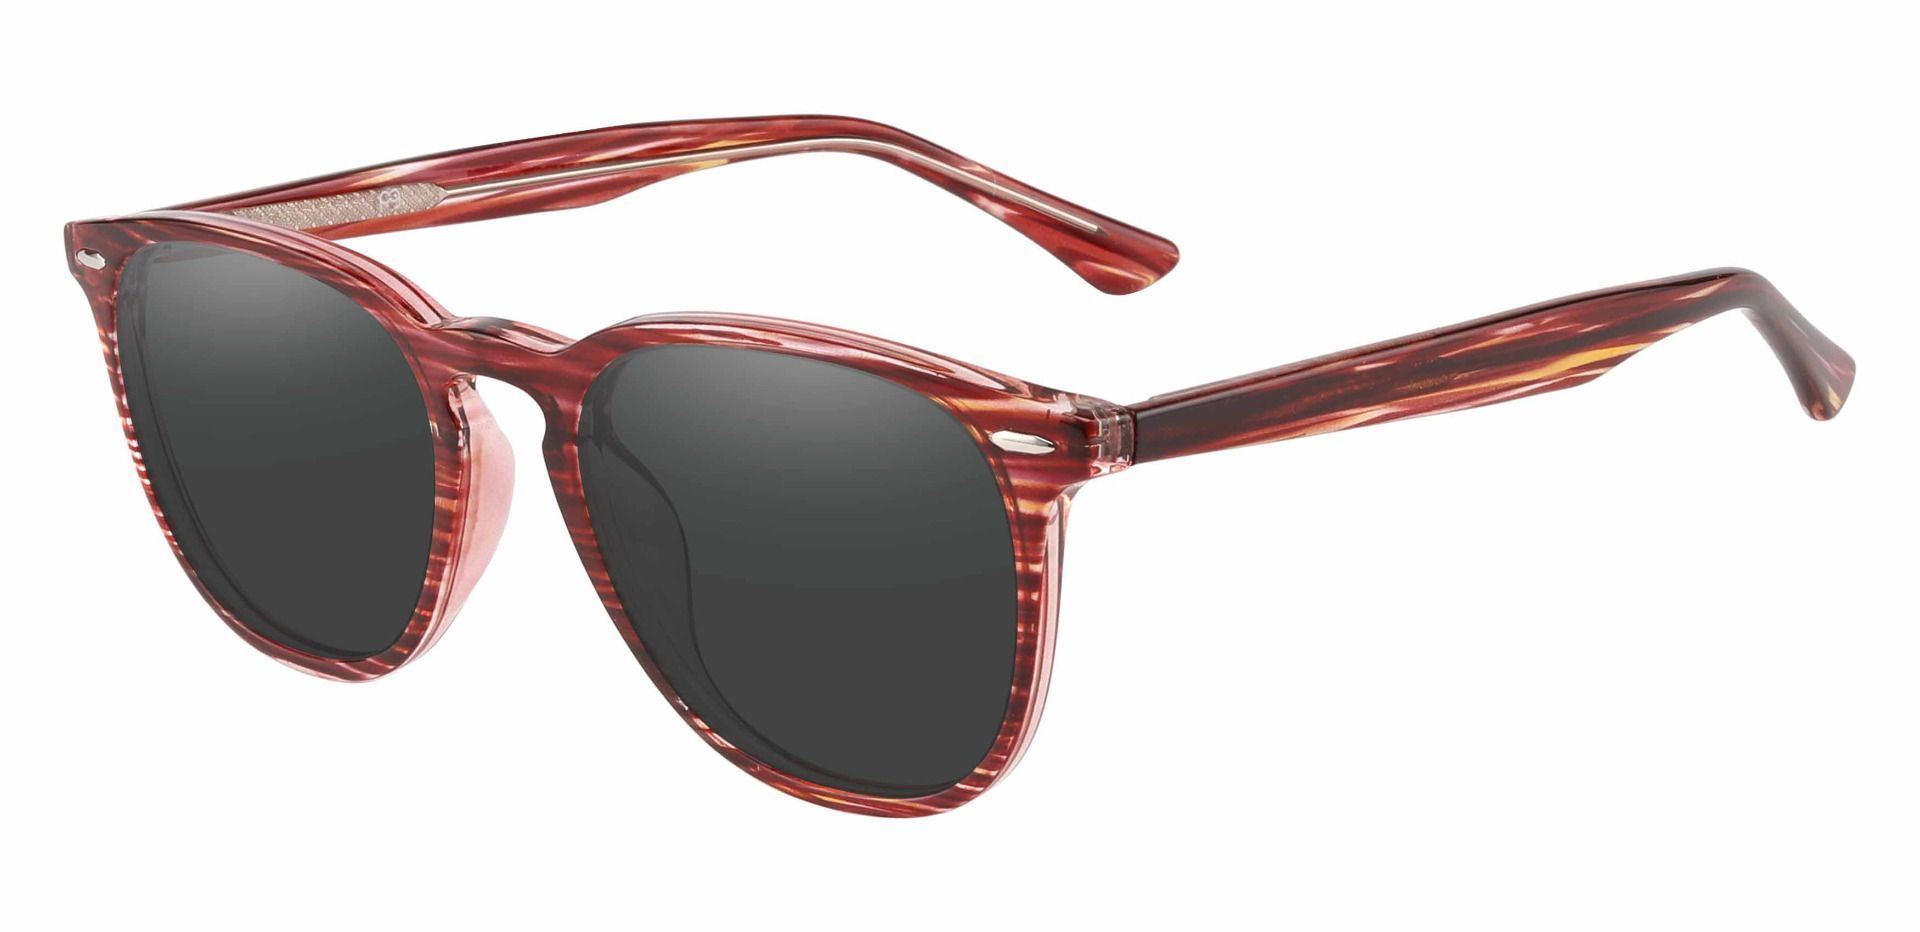 Sycamore Oval Prescription Sunglasses - Red Frame With Gray Lenses